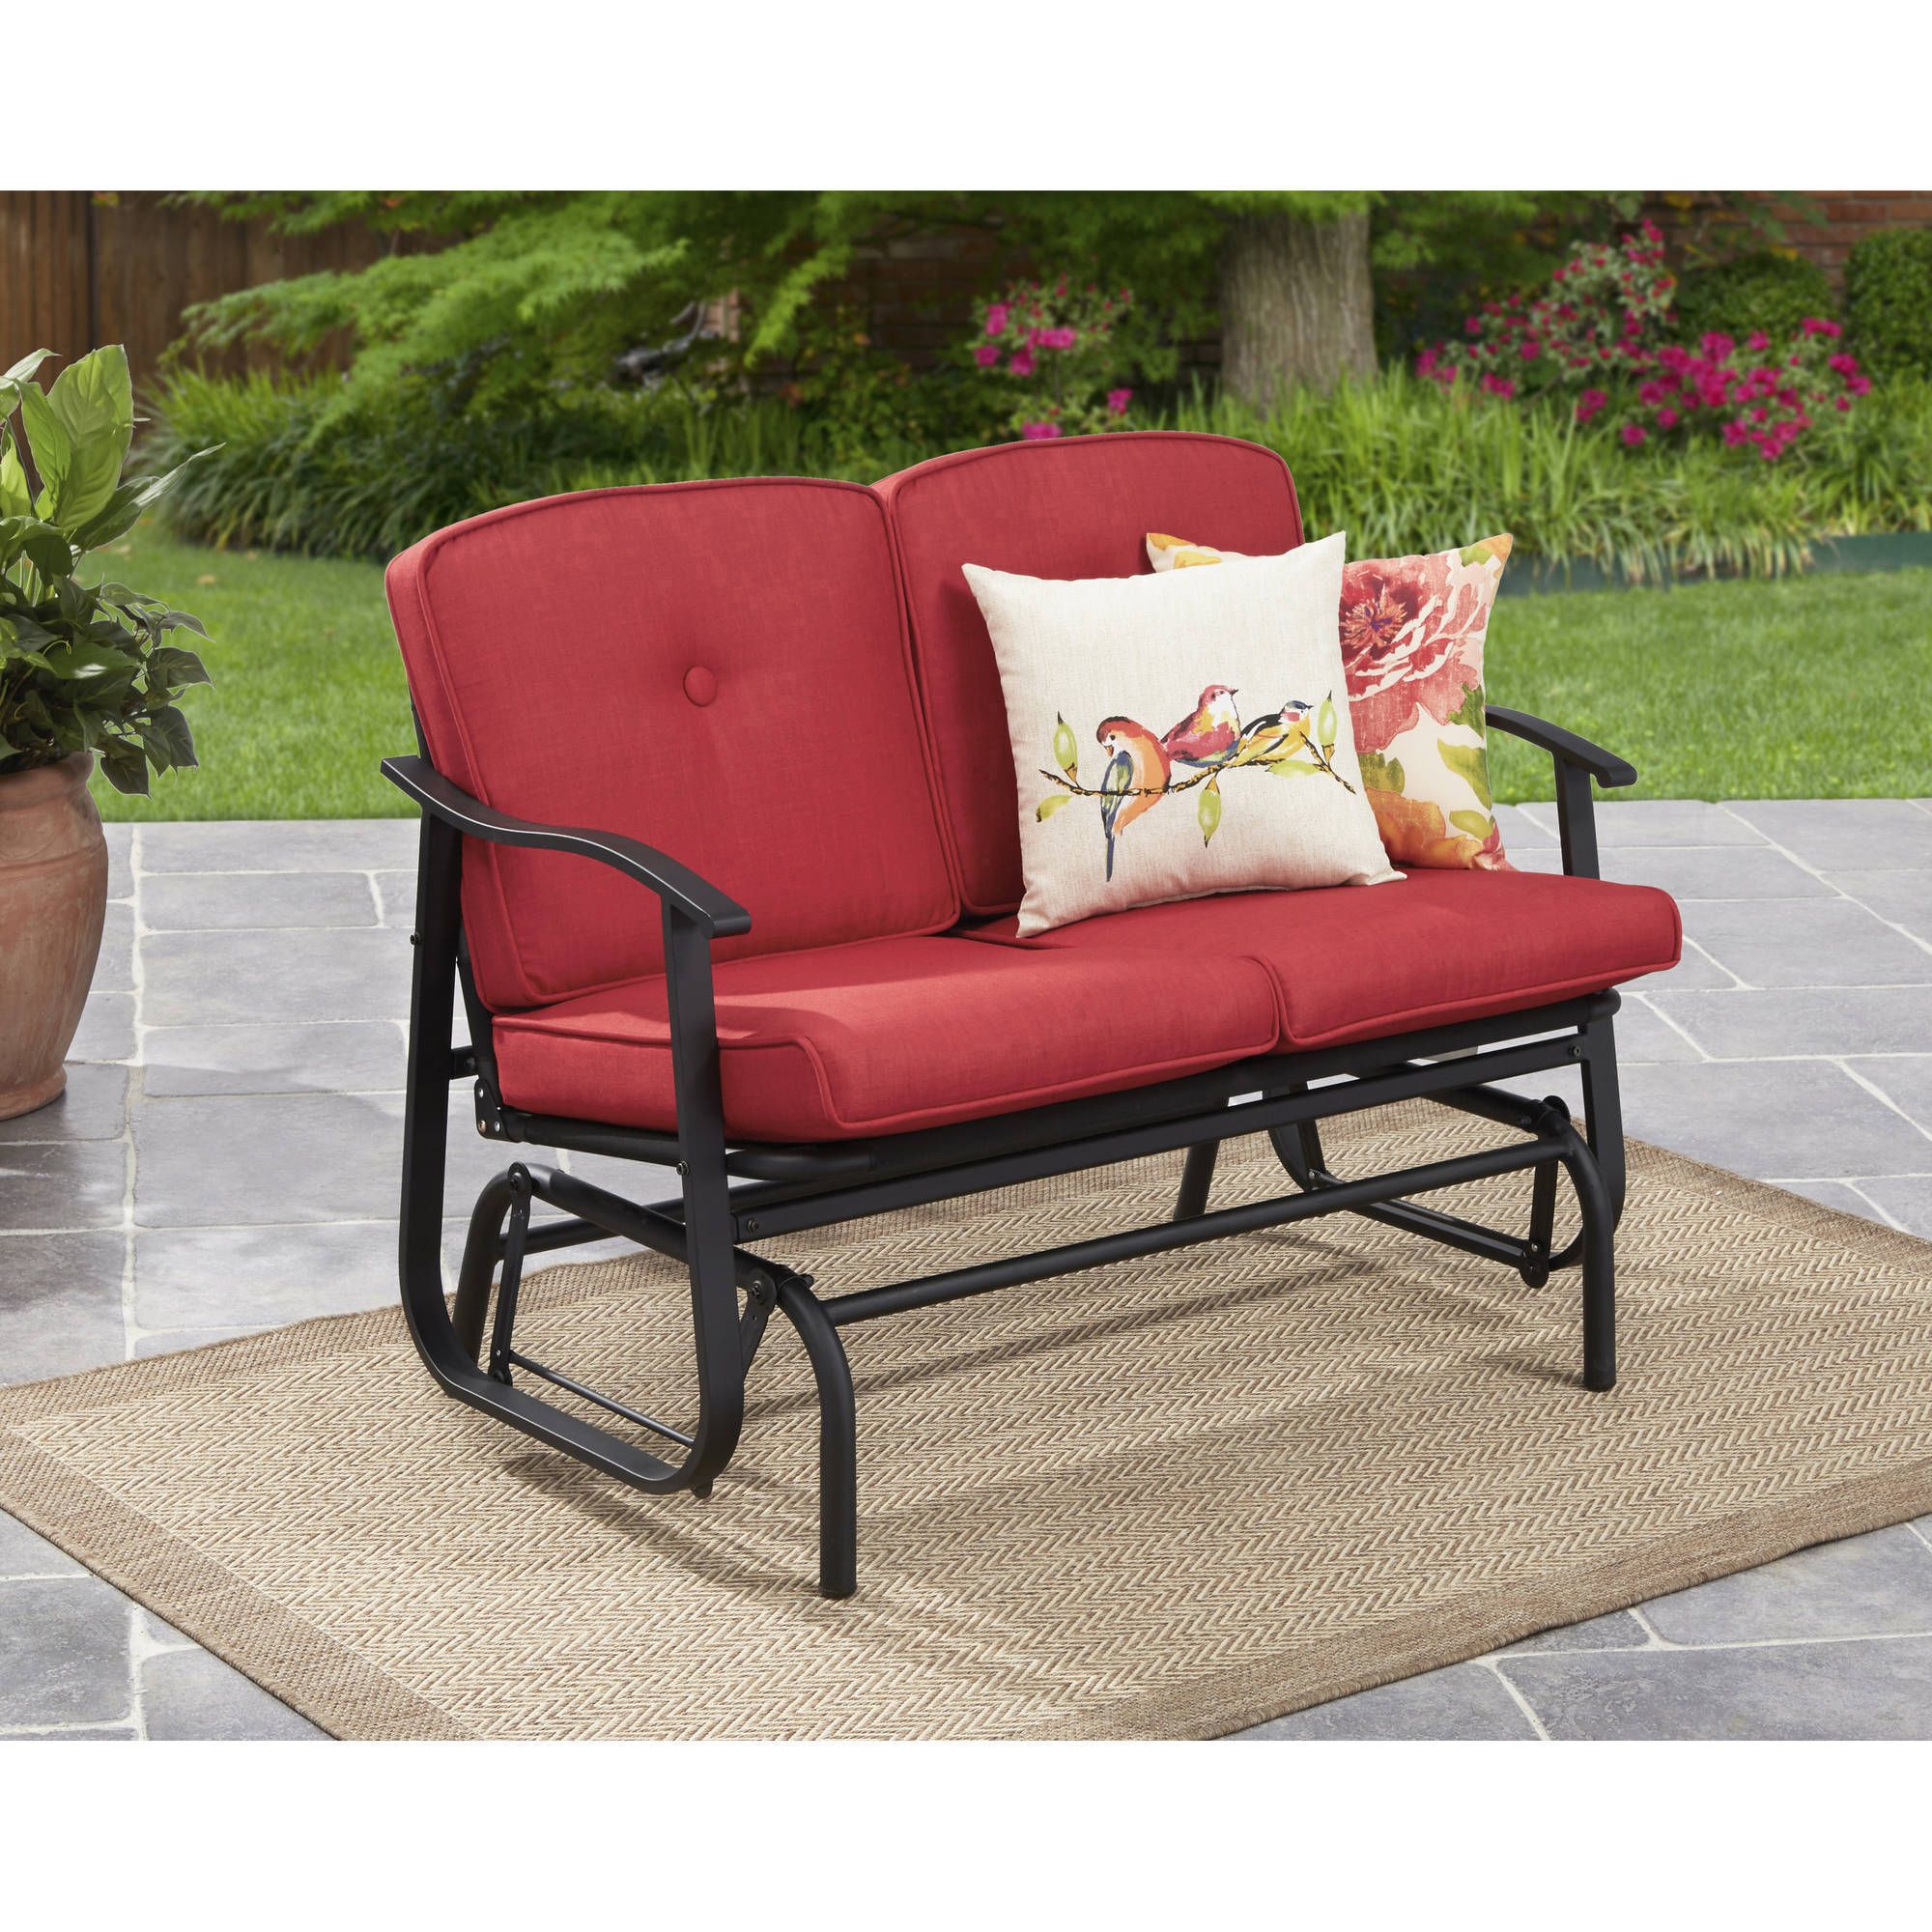 Most Up To Date Mainstays Belden Park Outdoor Loveseat Glider With Cushion – Walmart For Outdoor Loveseat Gliders With Cushion (View 1 of 25)